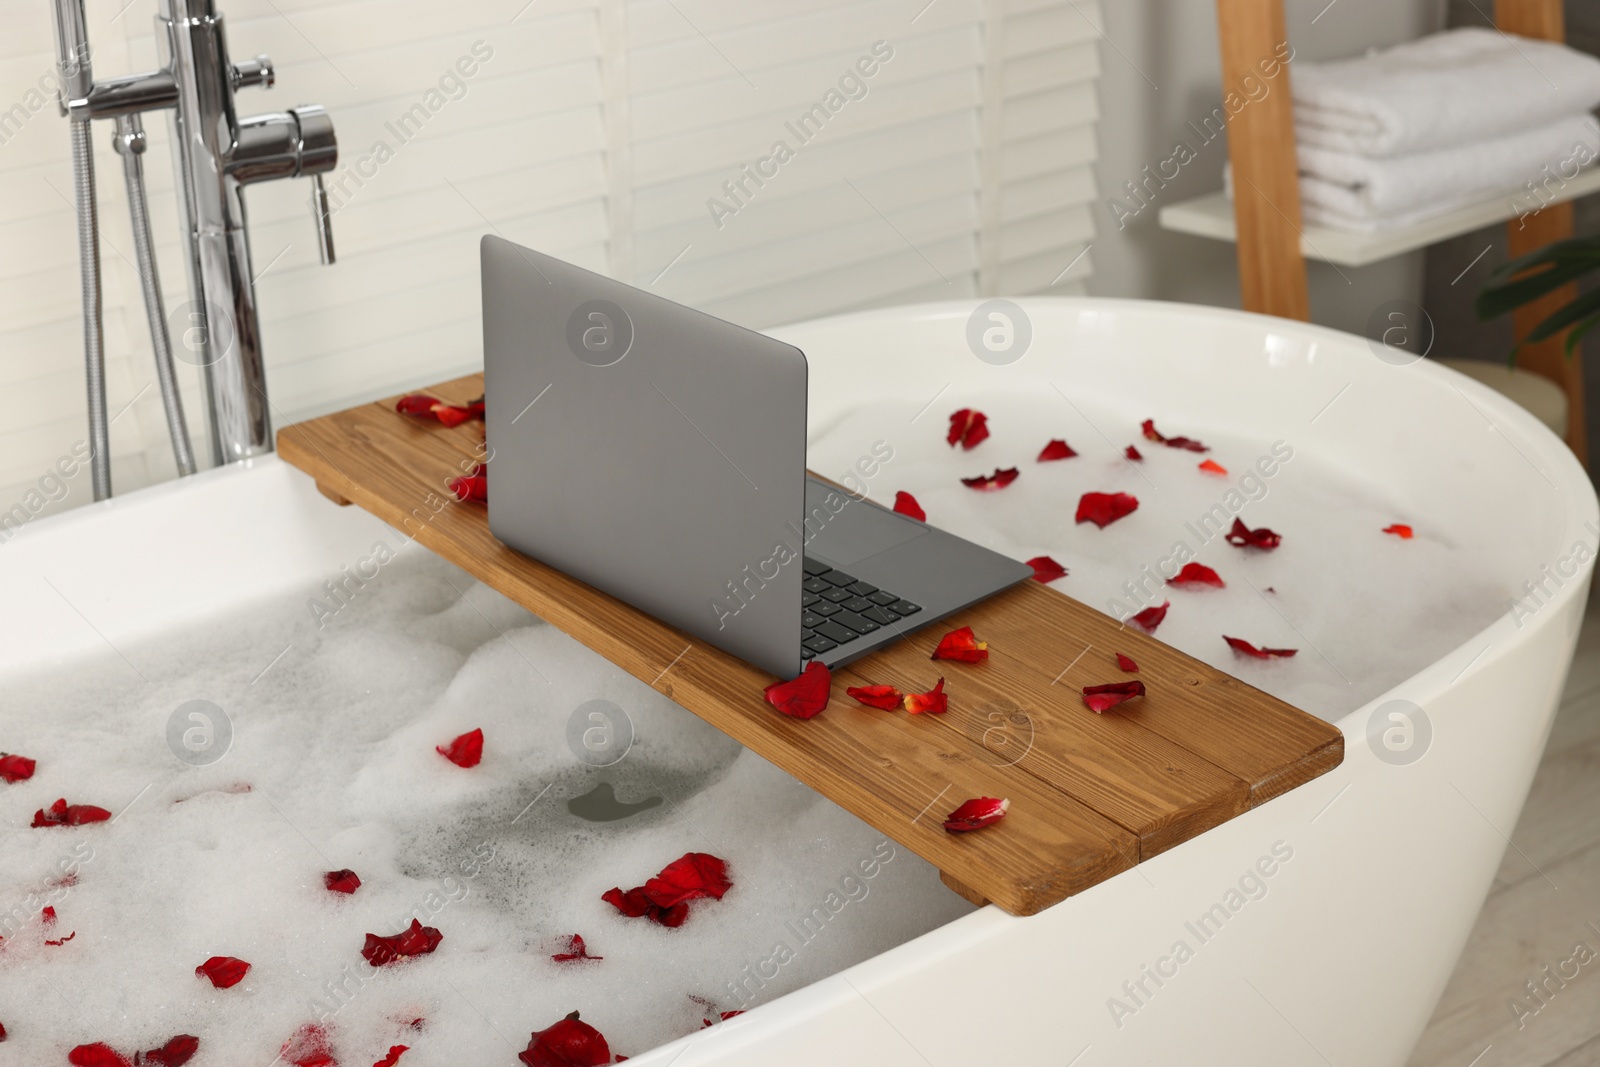 Photo of Wooden board with laptop and rose petals on bath tub